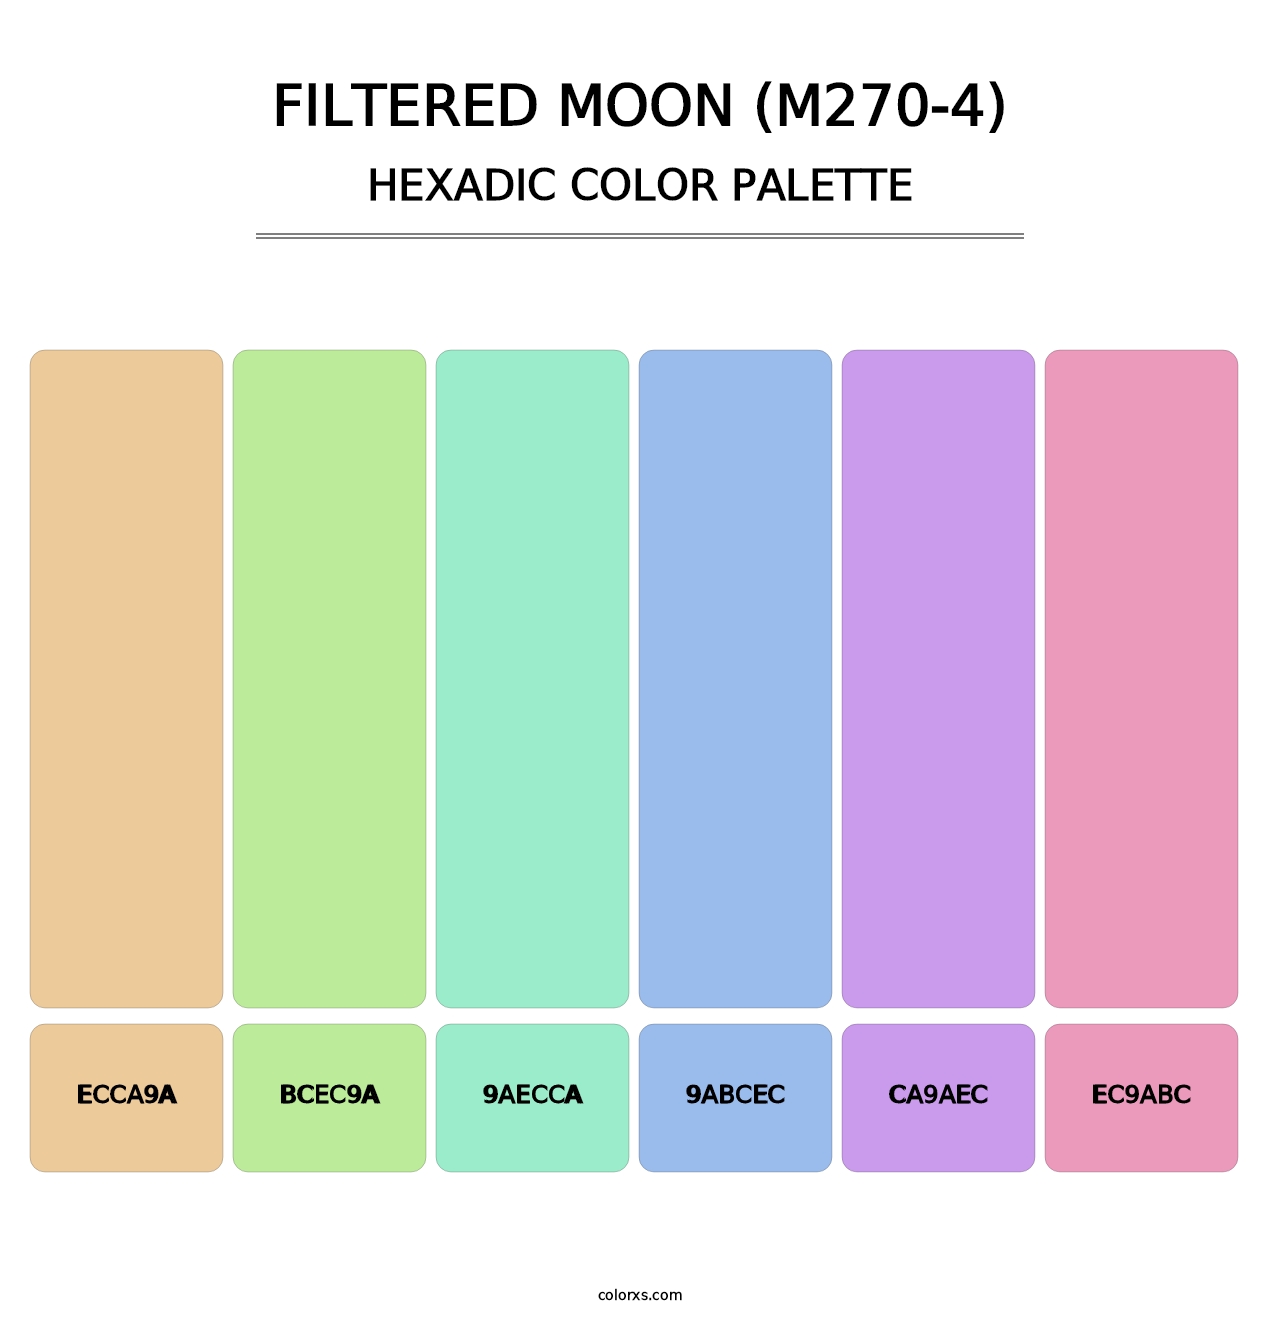 Filtered Moon (M270-4) - Hexadic Color Palette